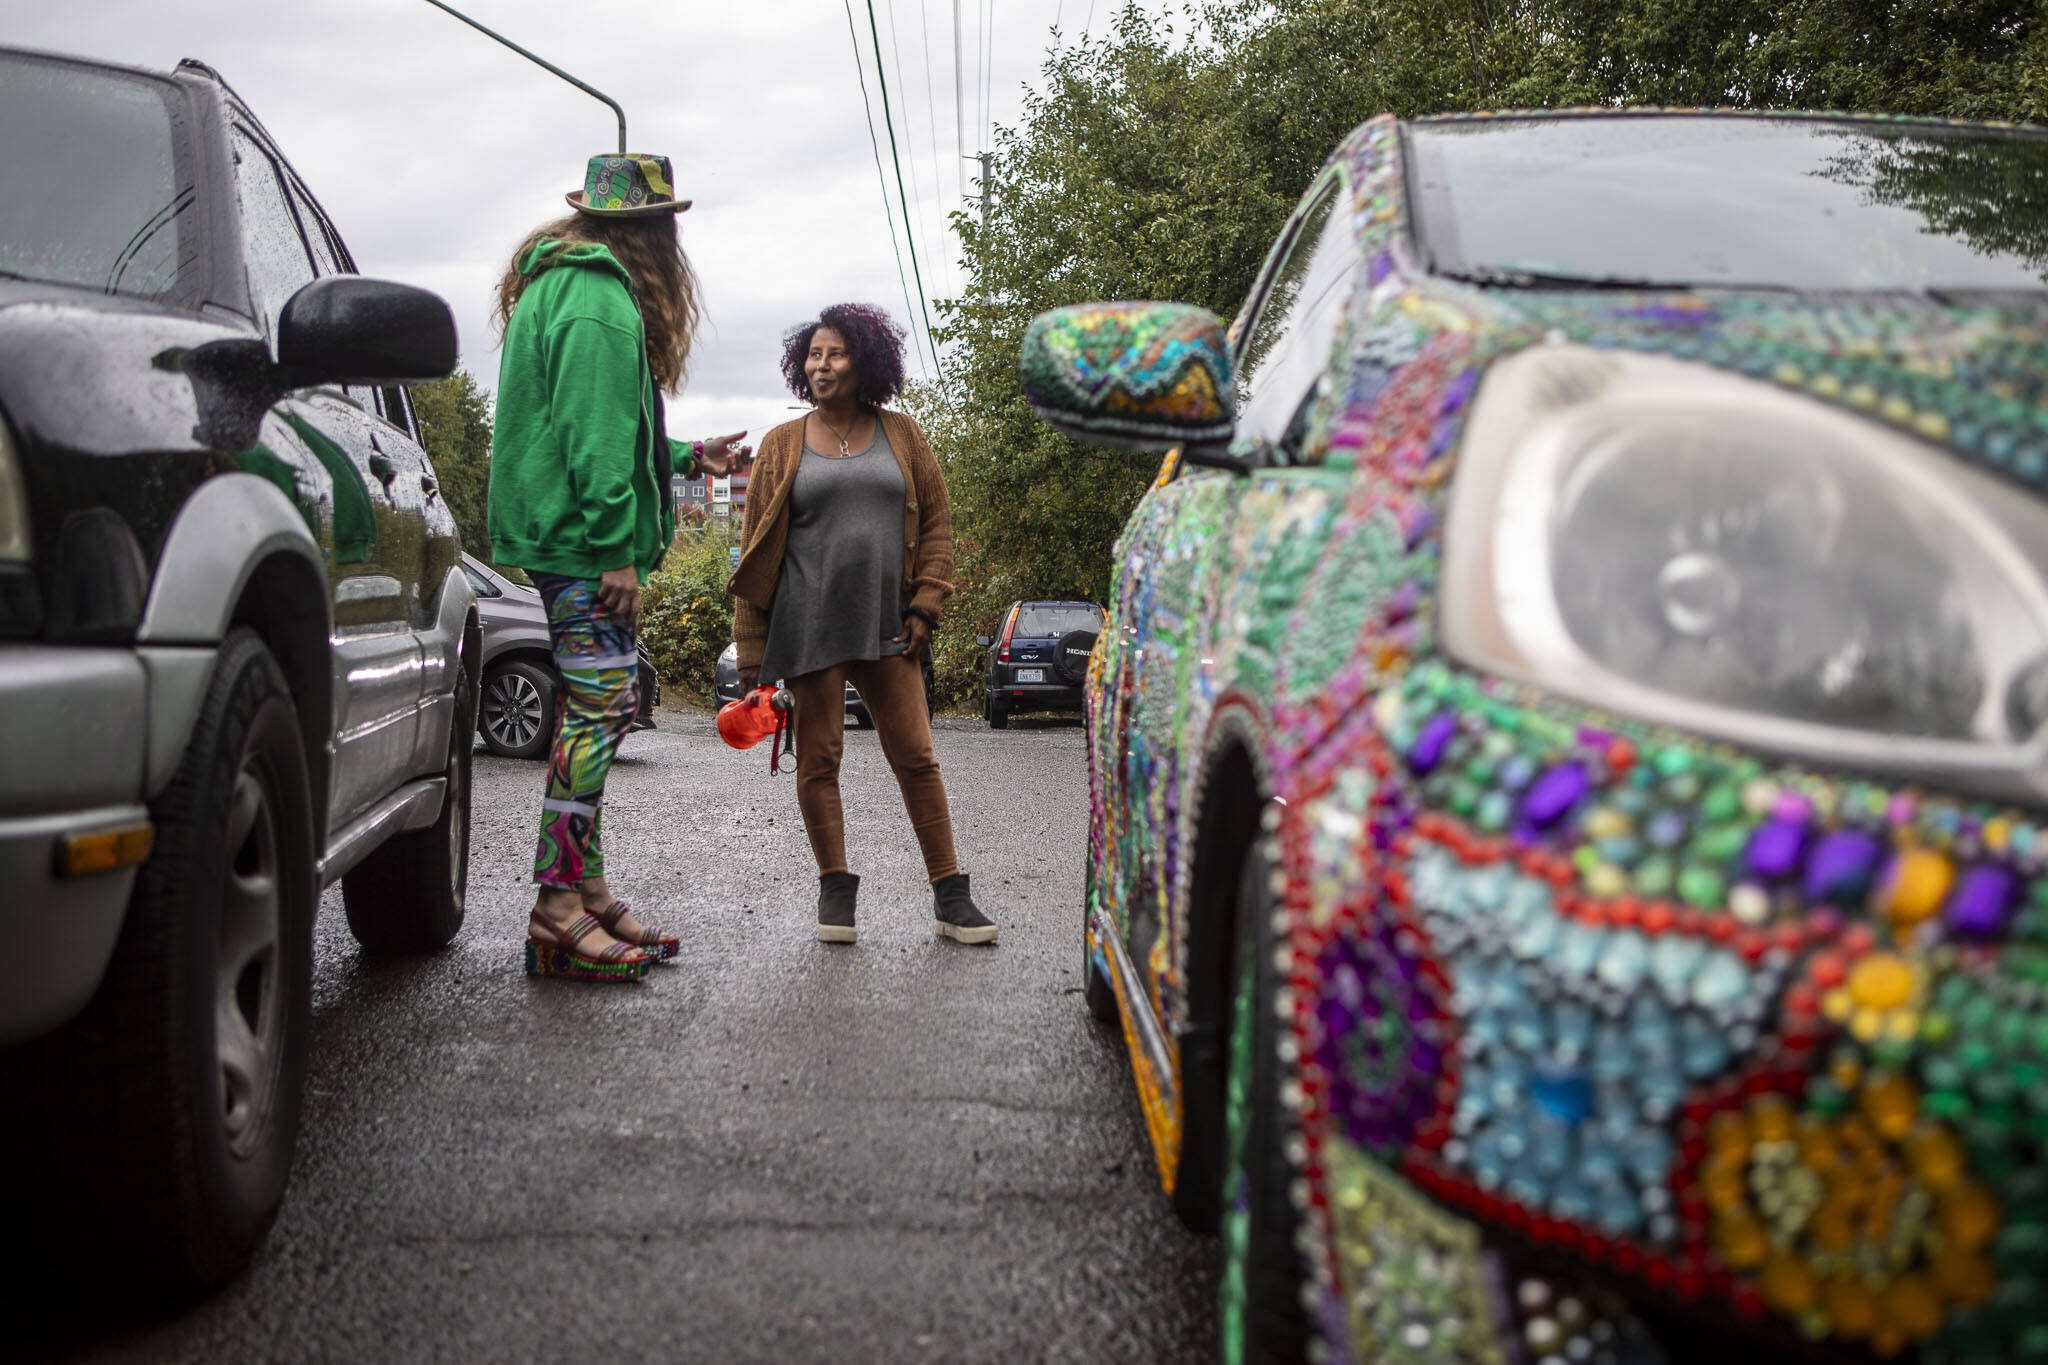 Shannon Kringen, left, talks to Salamawit Tesfamariam, right, about her jeweled car in the parking lot of Lynnwood’s 164th Street artesian well. (Annie Barker / The Herald)